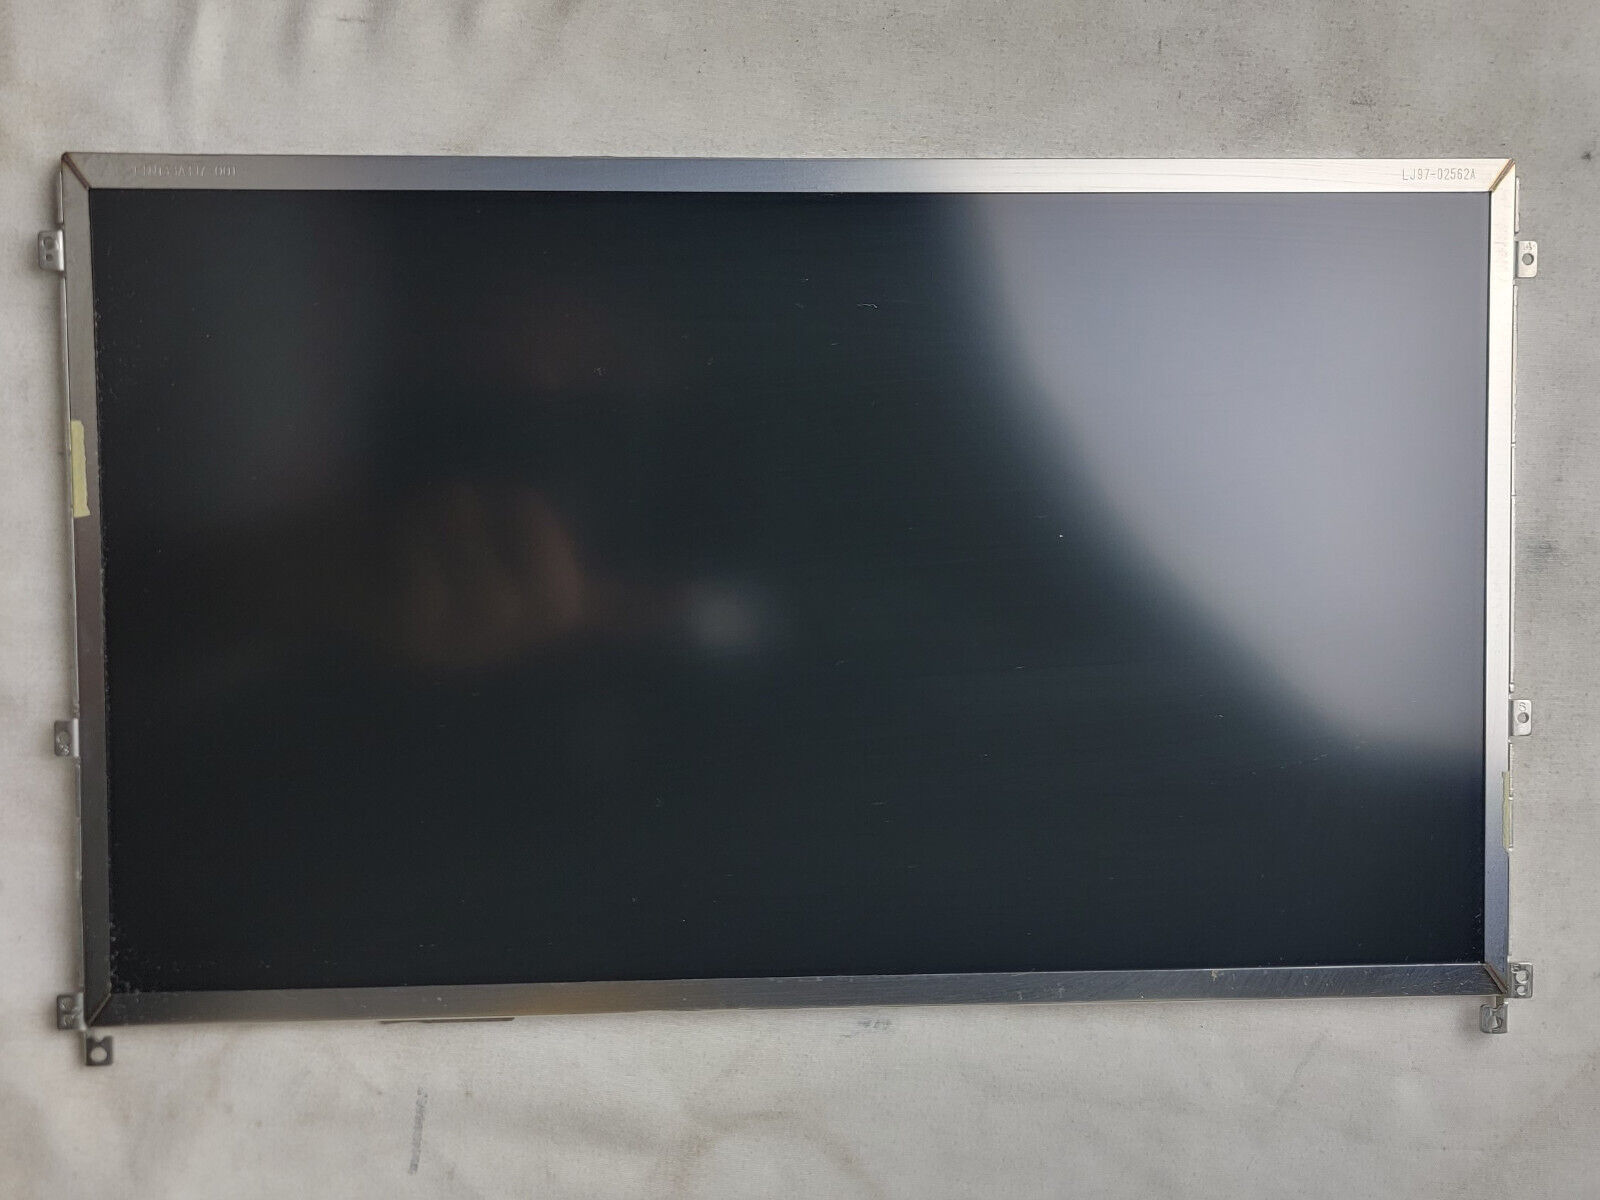 Primary image for Genuine OEM Dell Latitude Display 13.3" HD Screen LTN156AT17 0XF930 D31